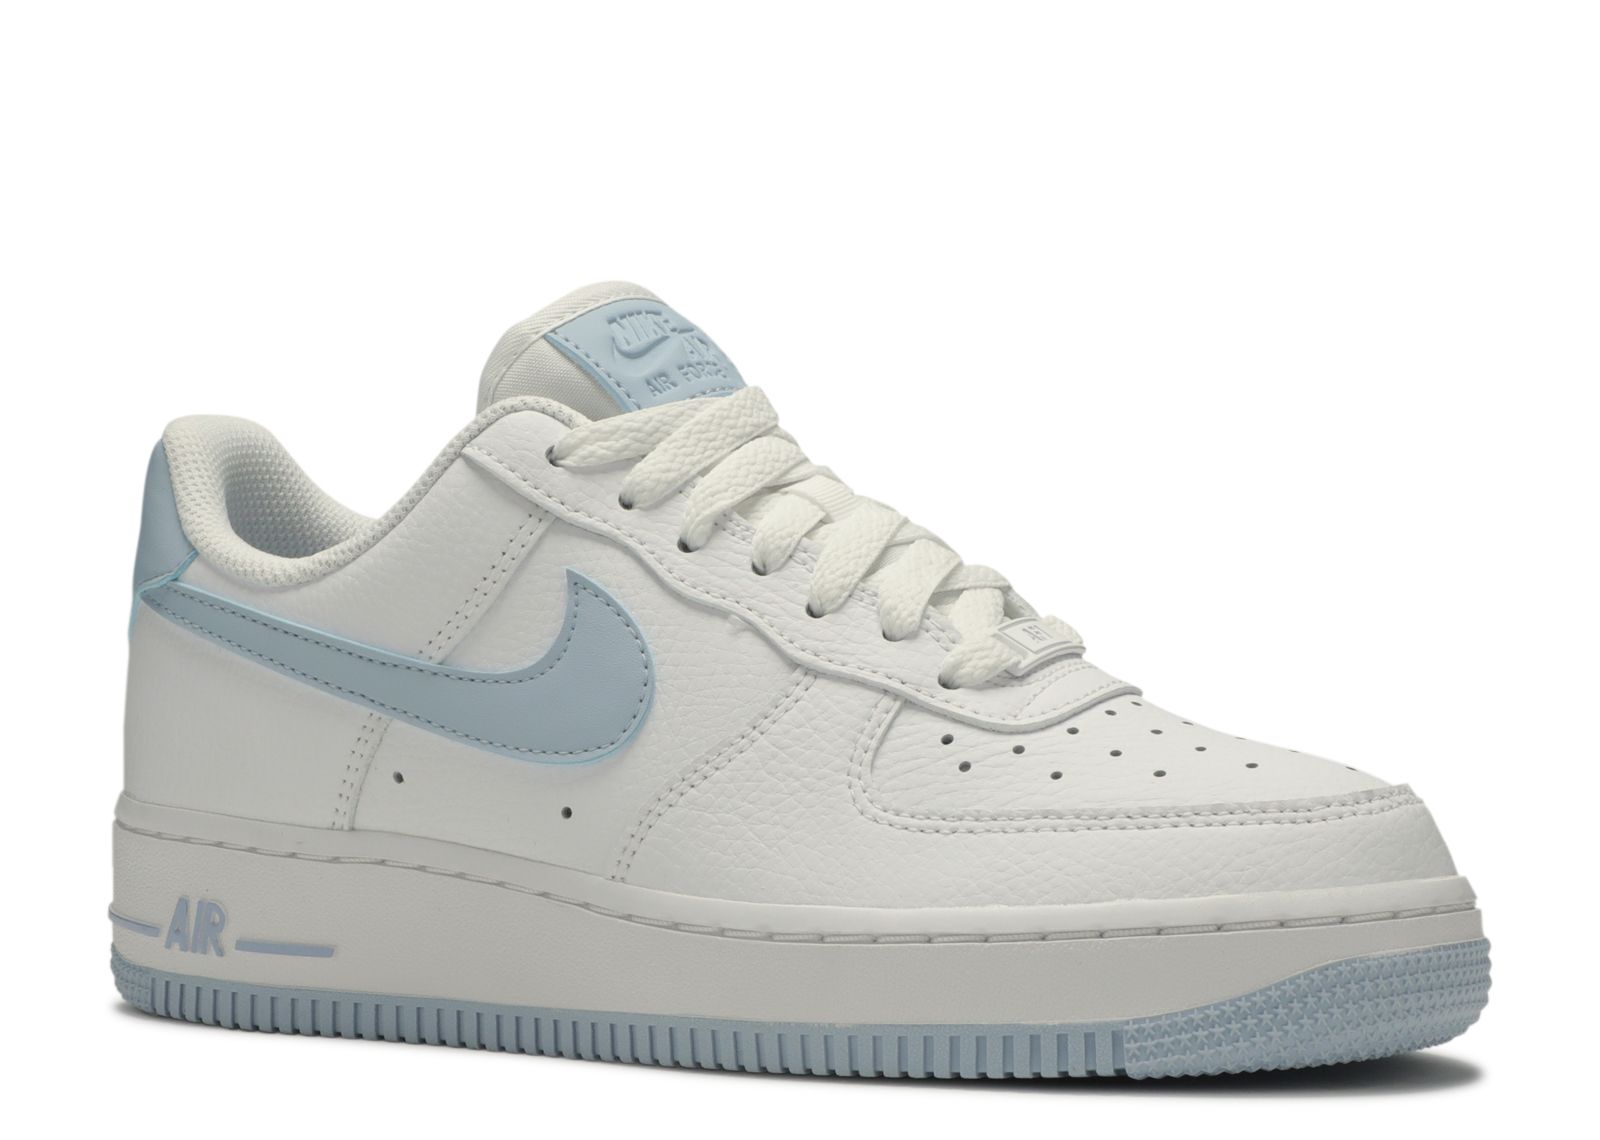 Wmns Air Force 1 Low '07 Patent 'Light Armory Blue'